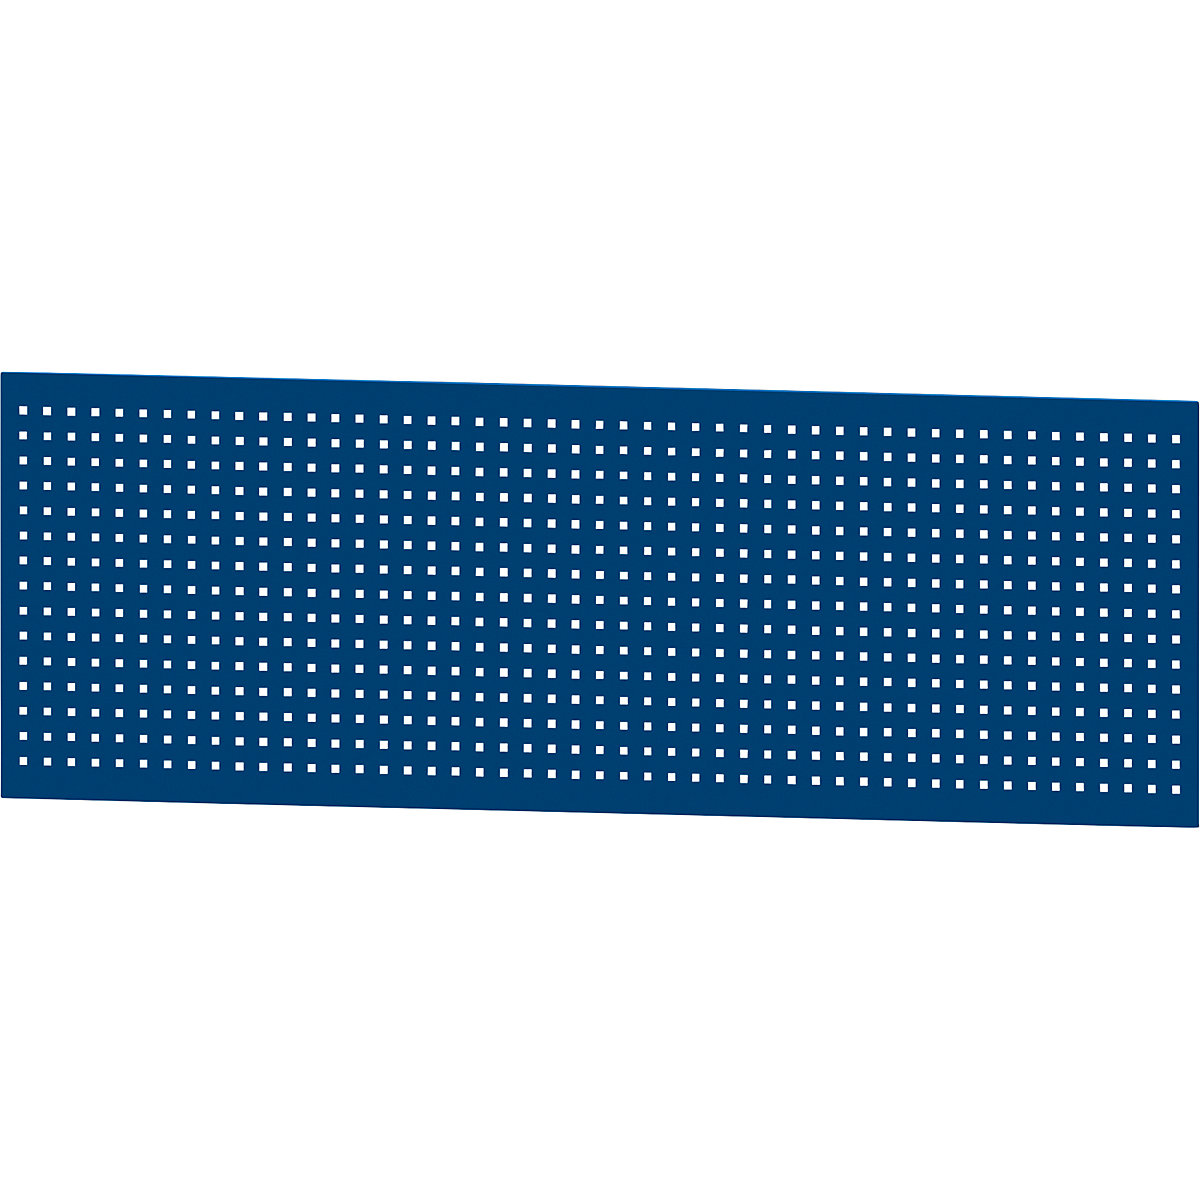 Modular system perforated panel for electrically height adjustable LIFT work tables - ANKE